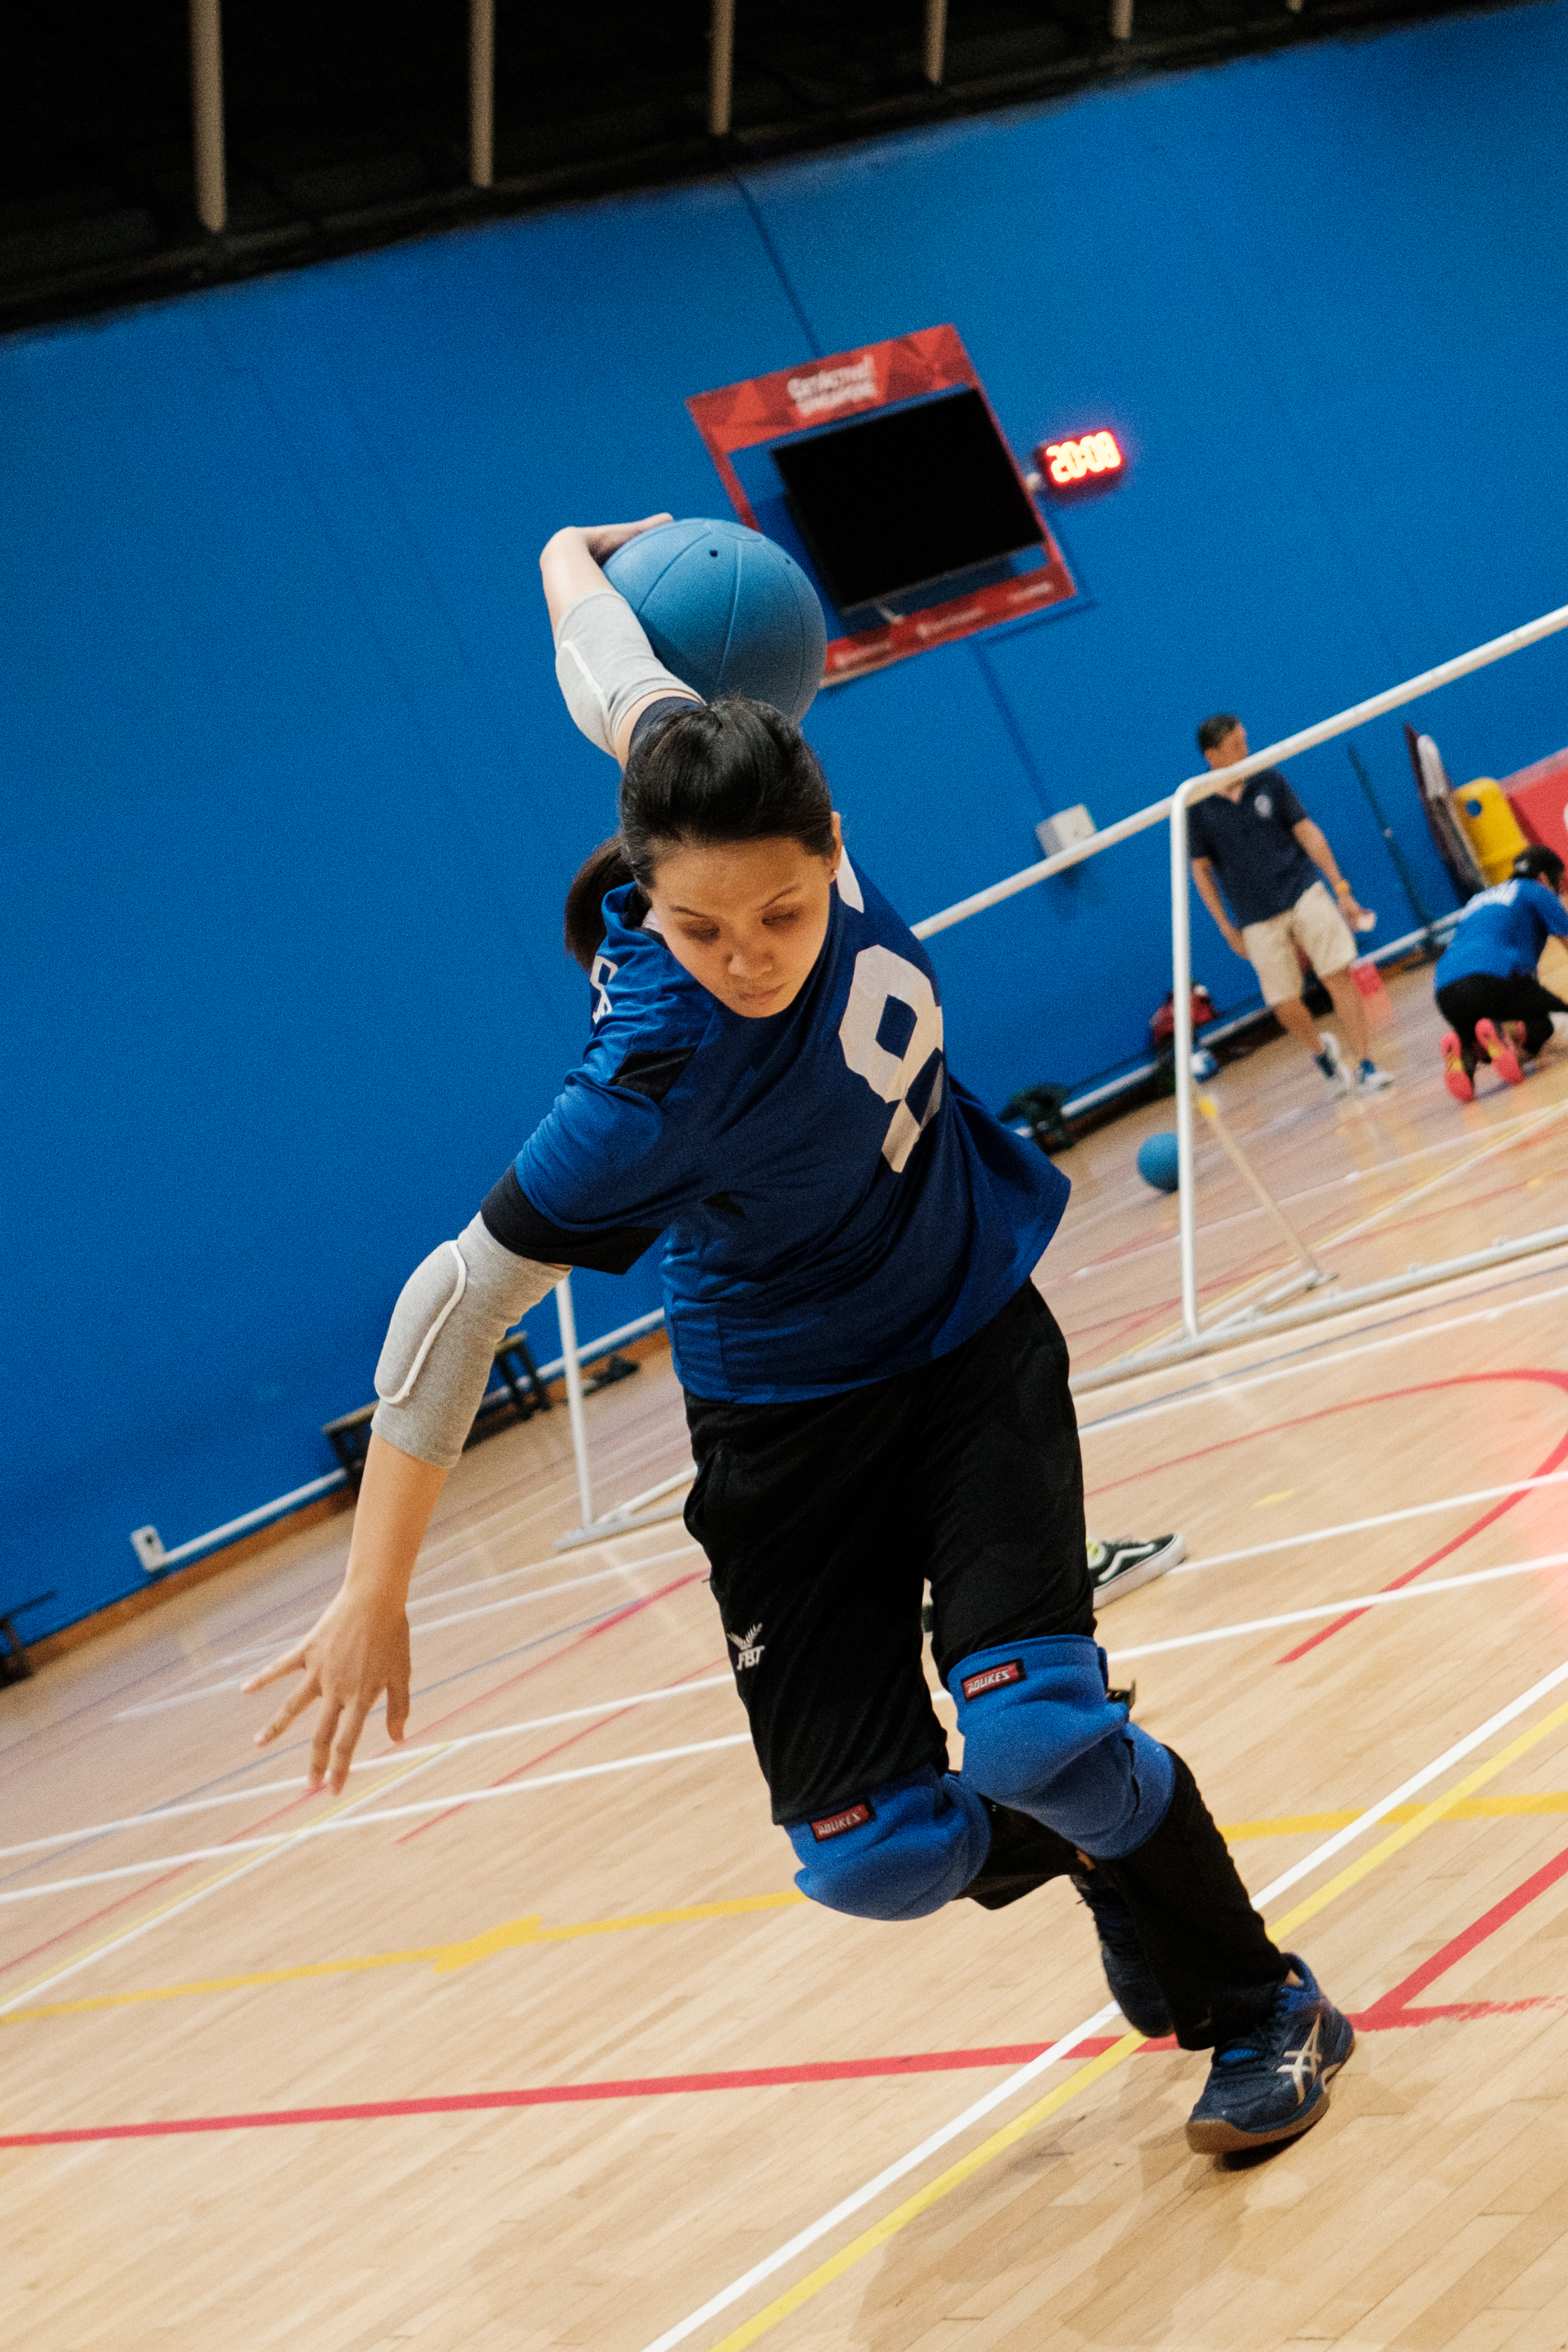 Joan Hung demonstrates a throw in goalball